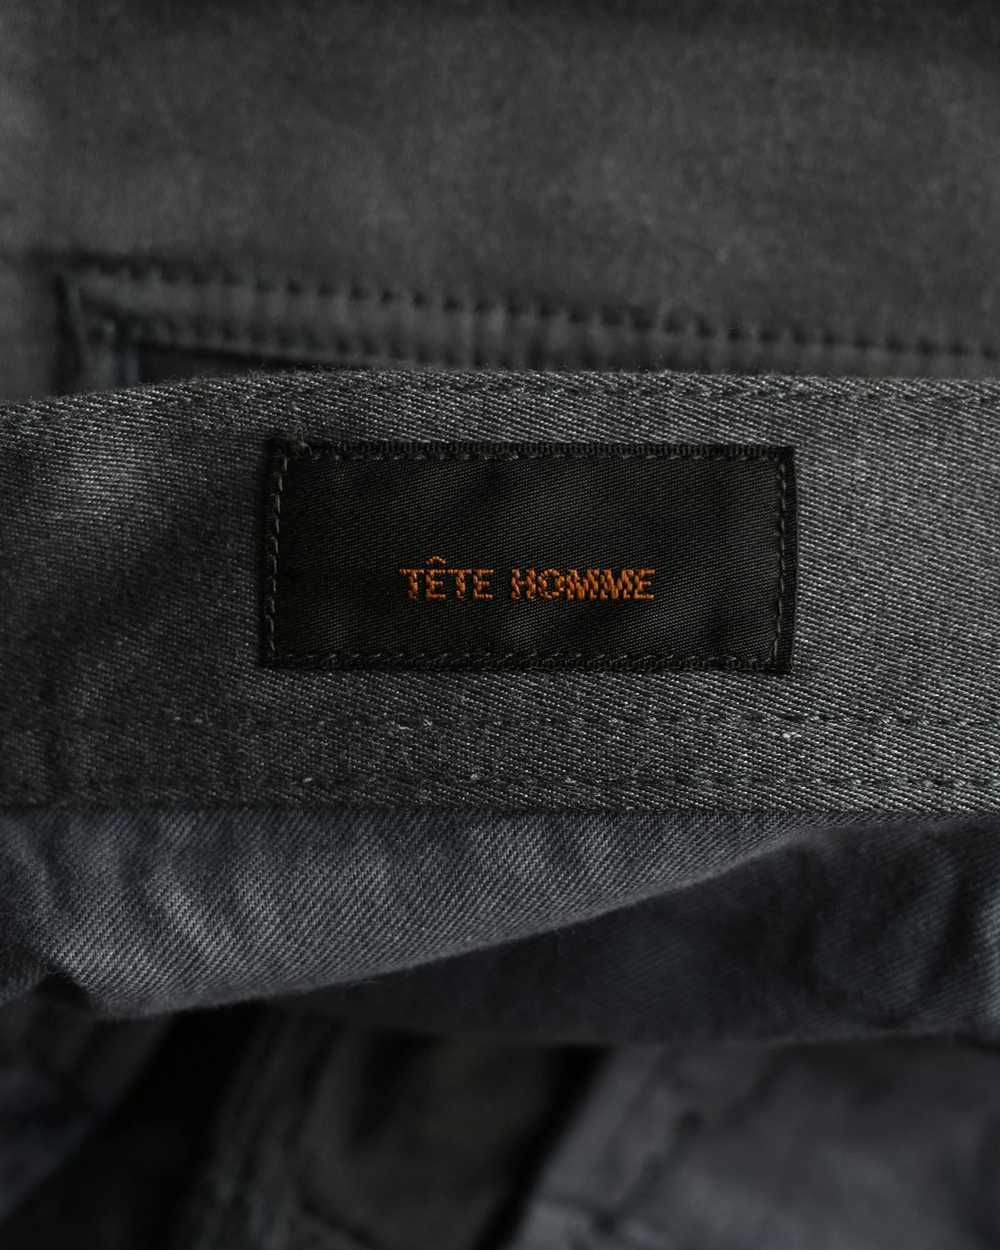 Tete Homme Tete Homme Military Style Flare Pants - image 4